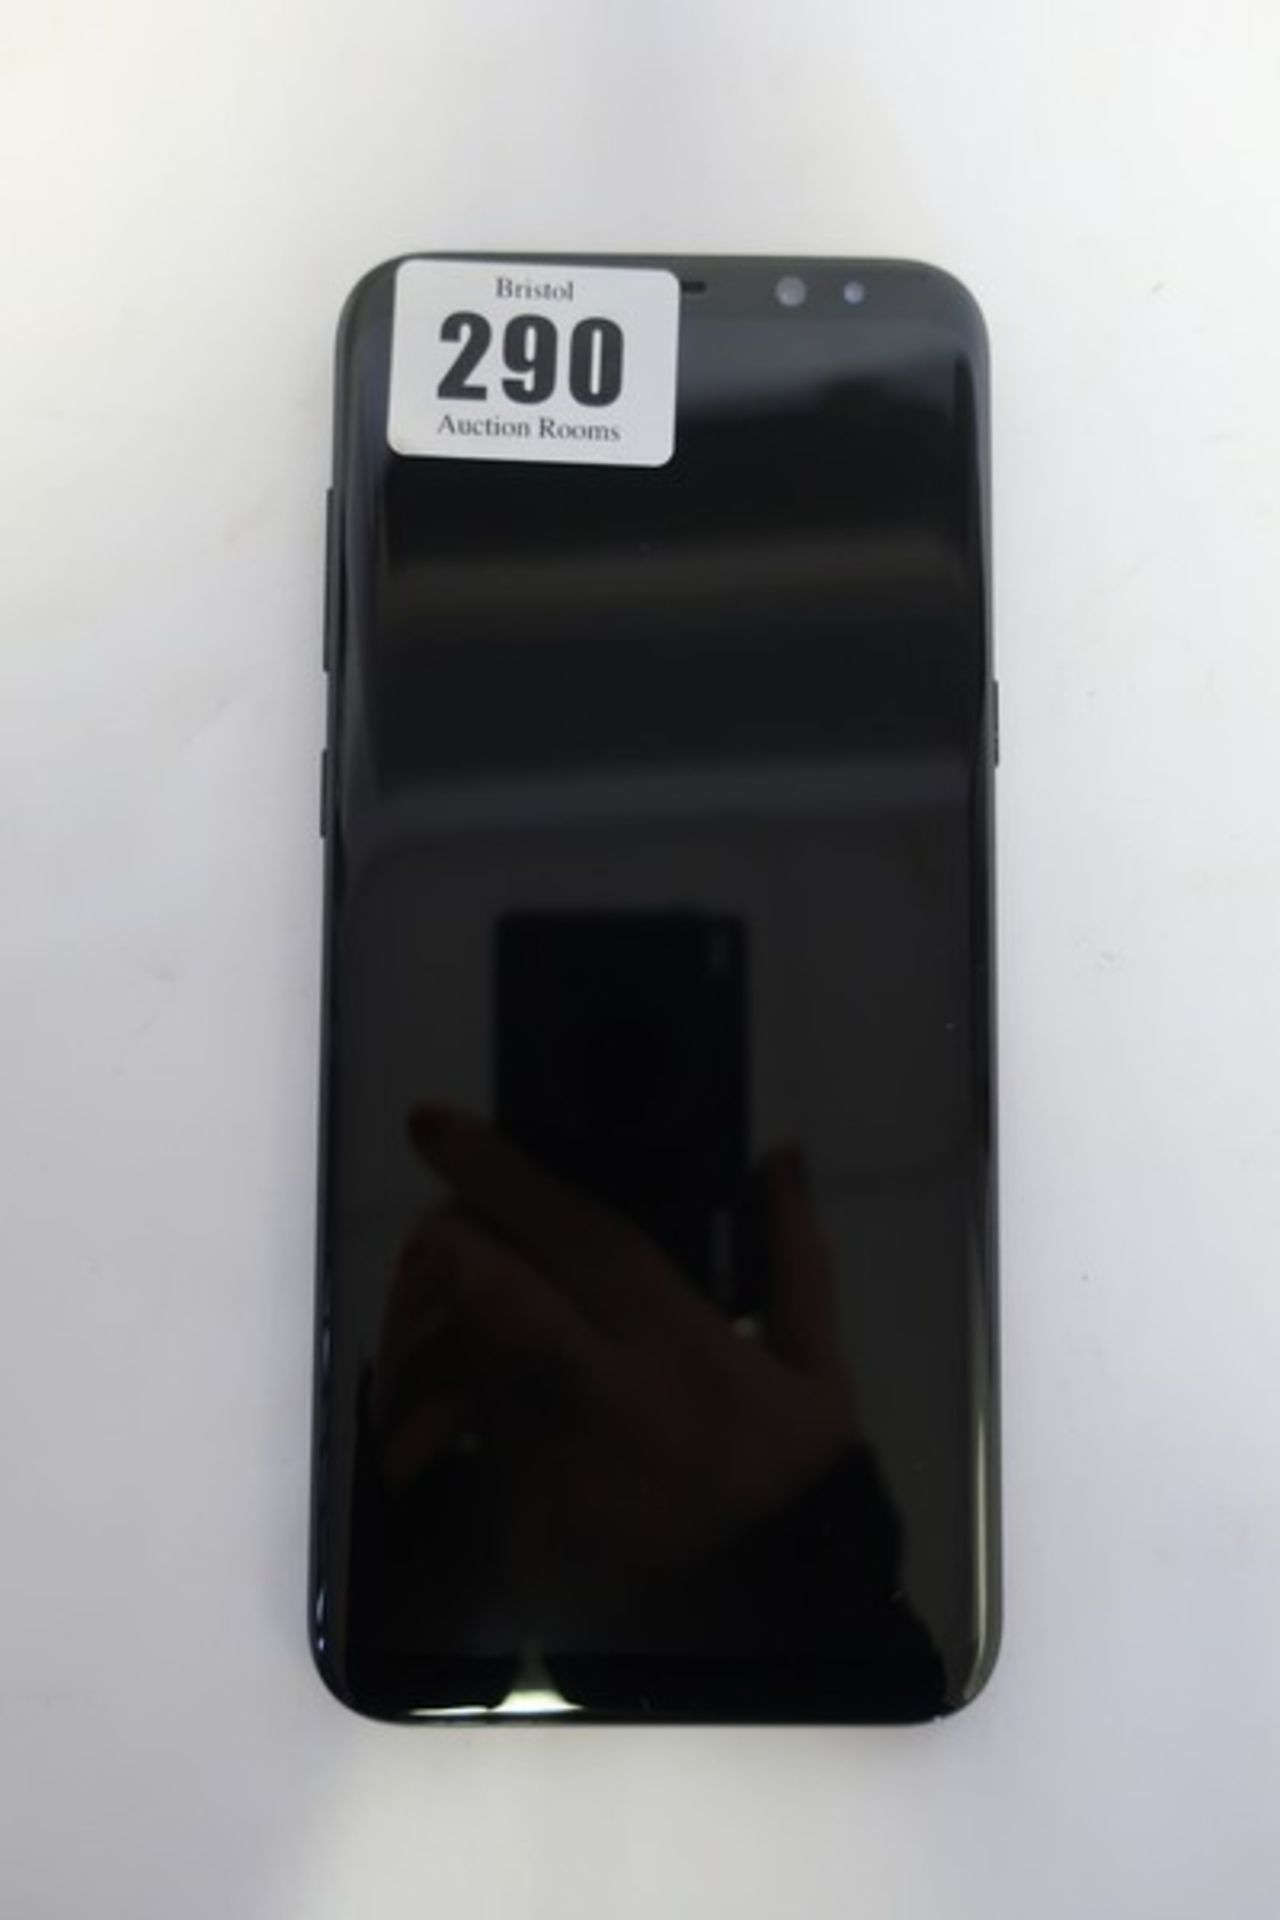 A Samsung Galaxy S8+ SM-G955F 64GB in Black (IMEI: 351558095321867) (FRP locked, sold for spares